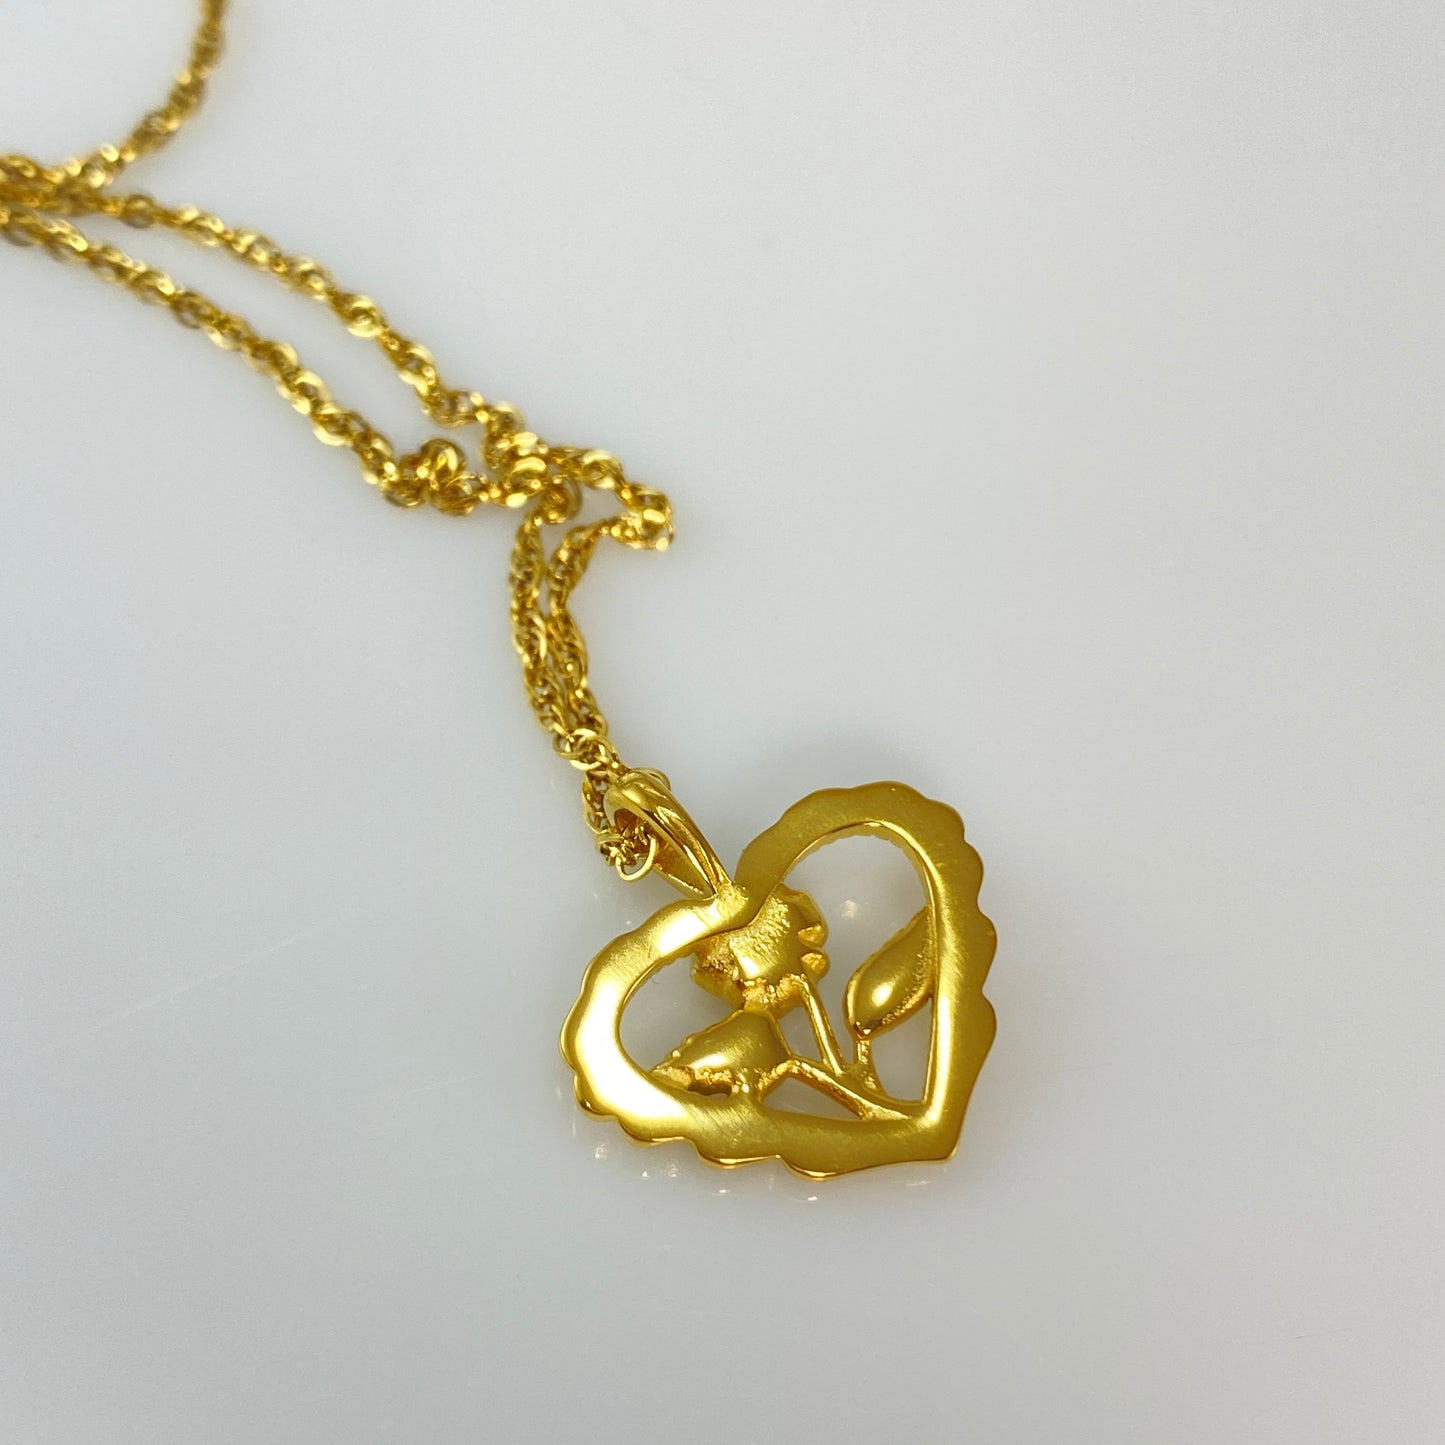 18 kt Gold Plated Heart Pendant on Stainless Steel Twisted Singapore Chain Necklace